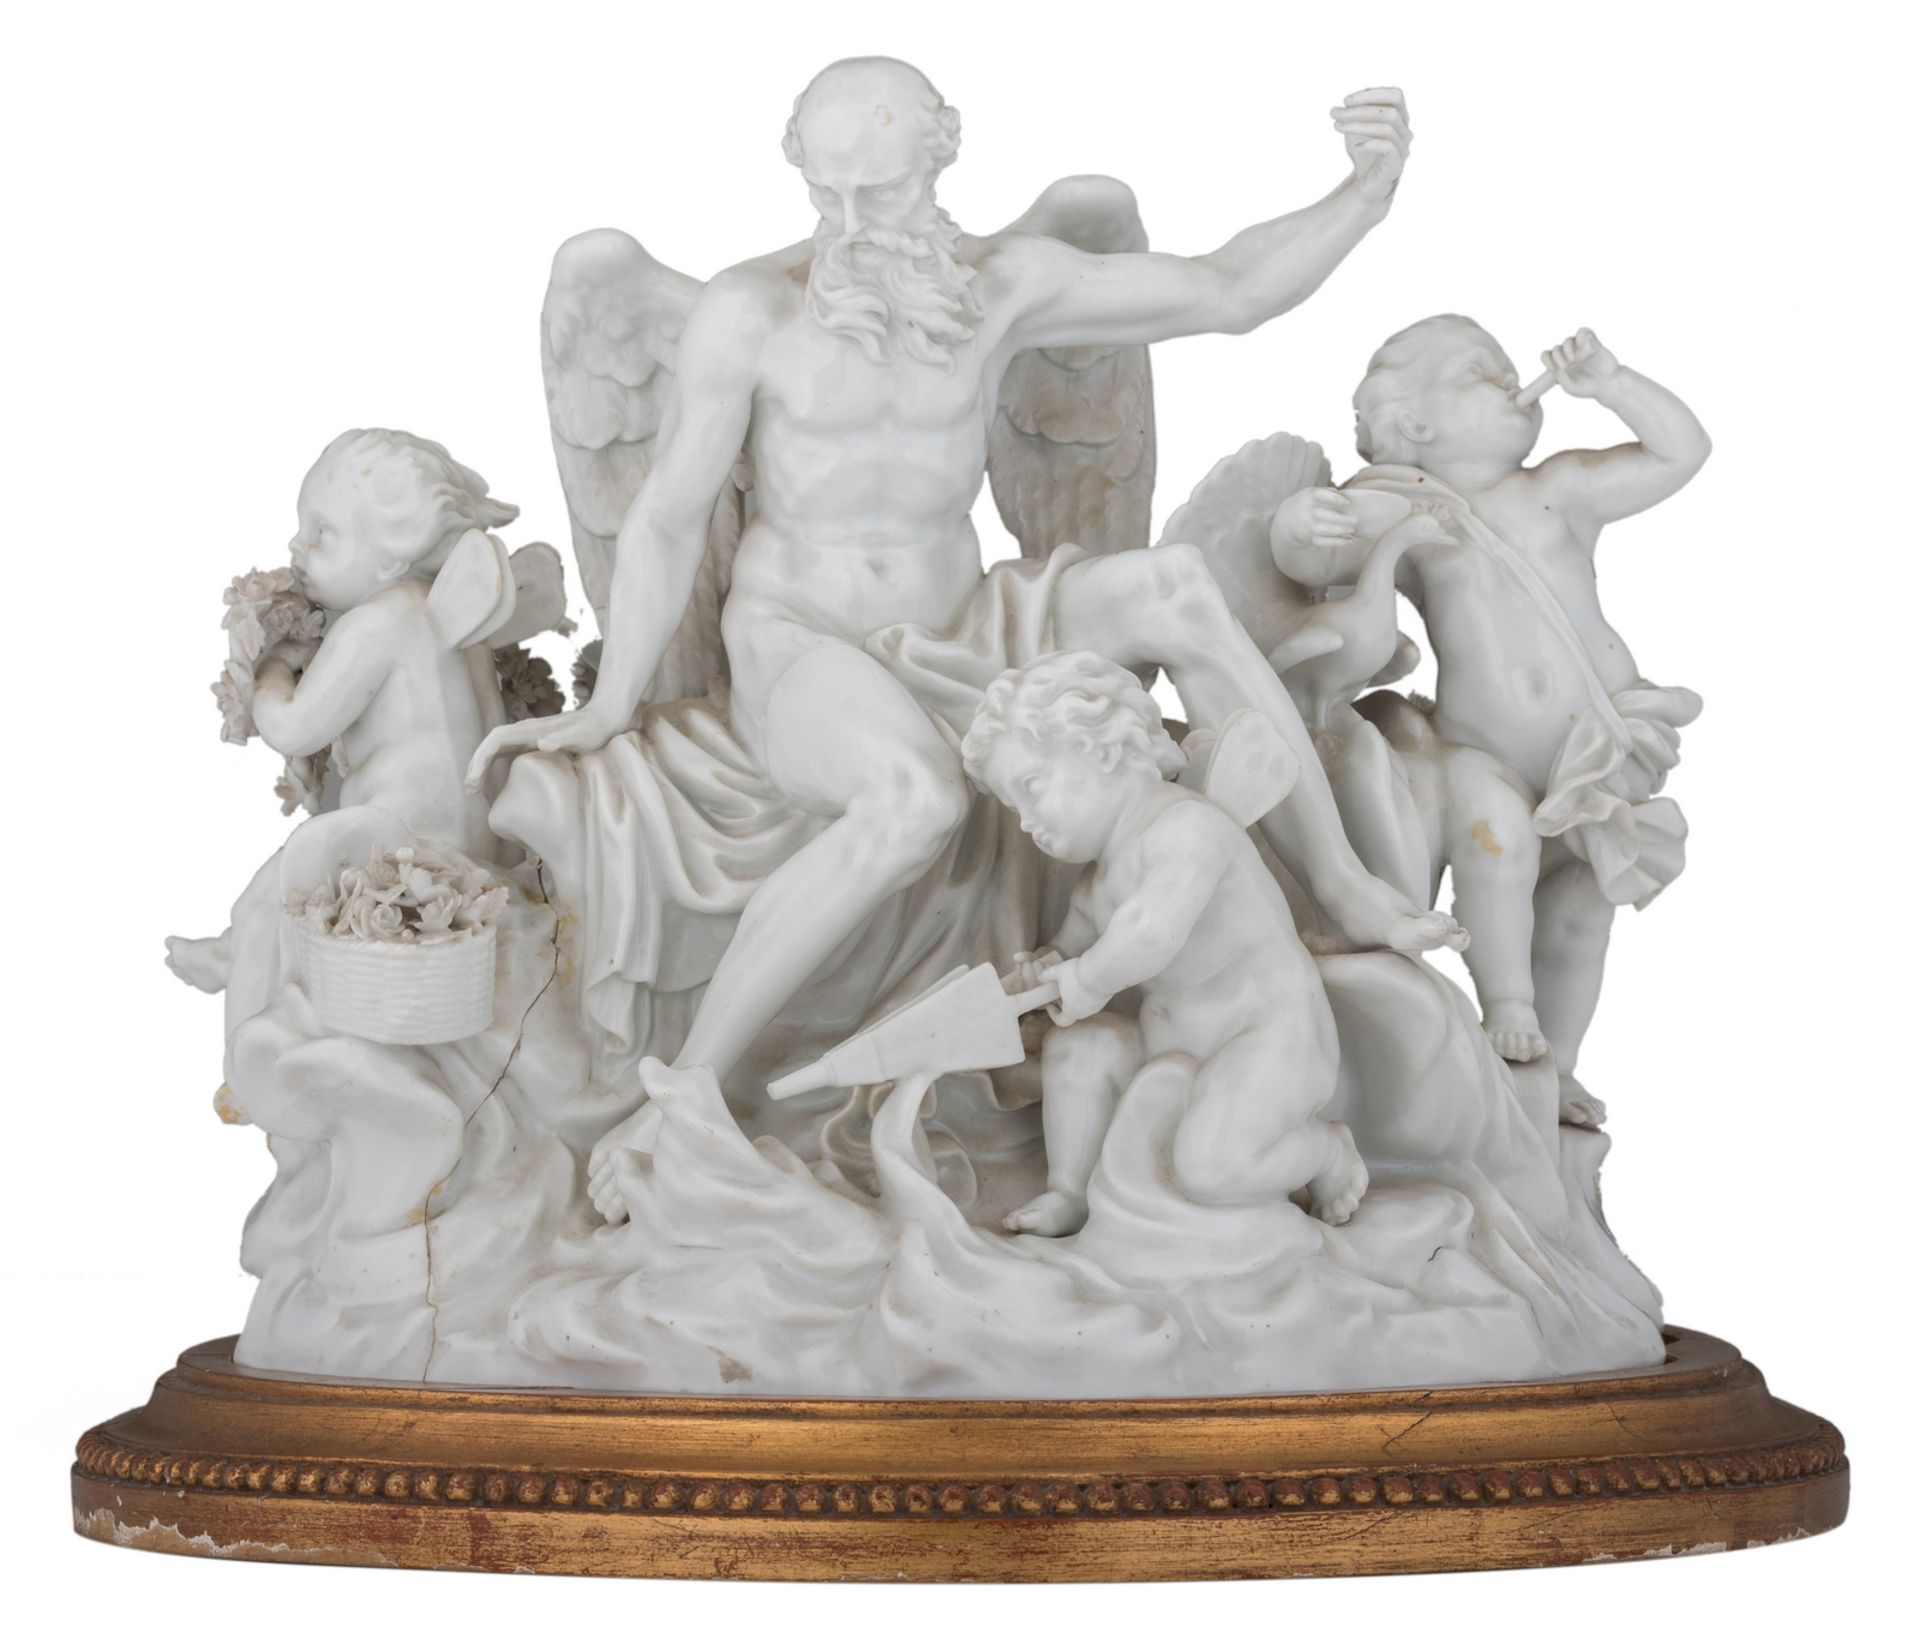 An 18thC Meissen porcelain group depicting Chronos (the time) surrounded by putto, Marcolini period,